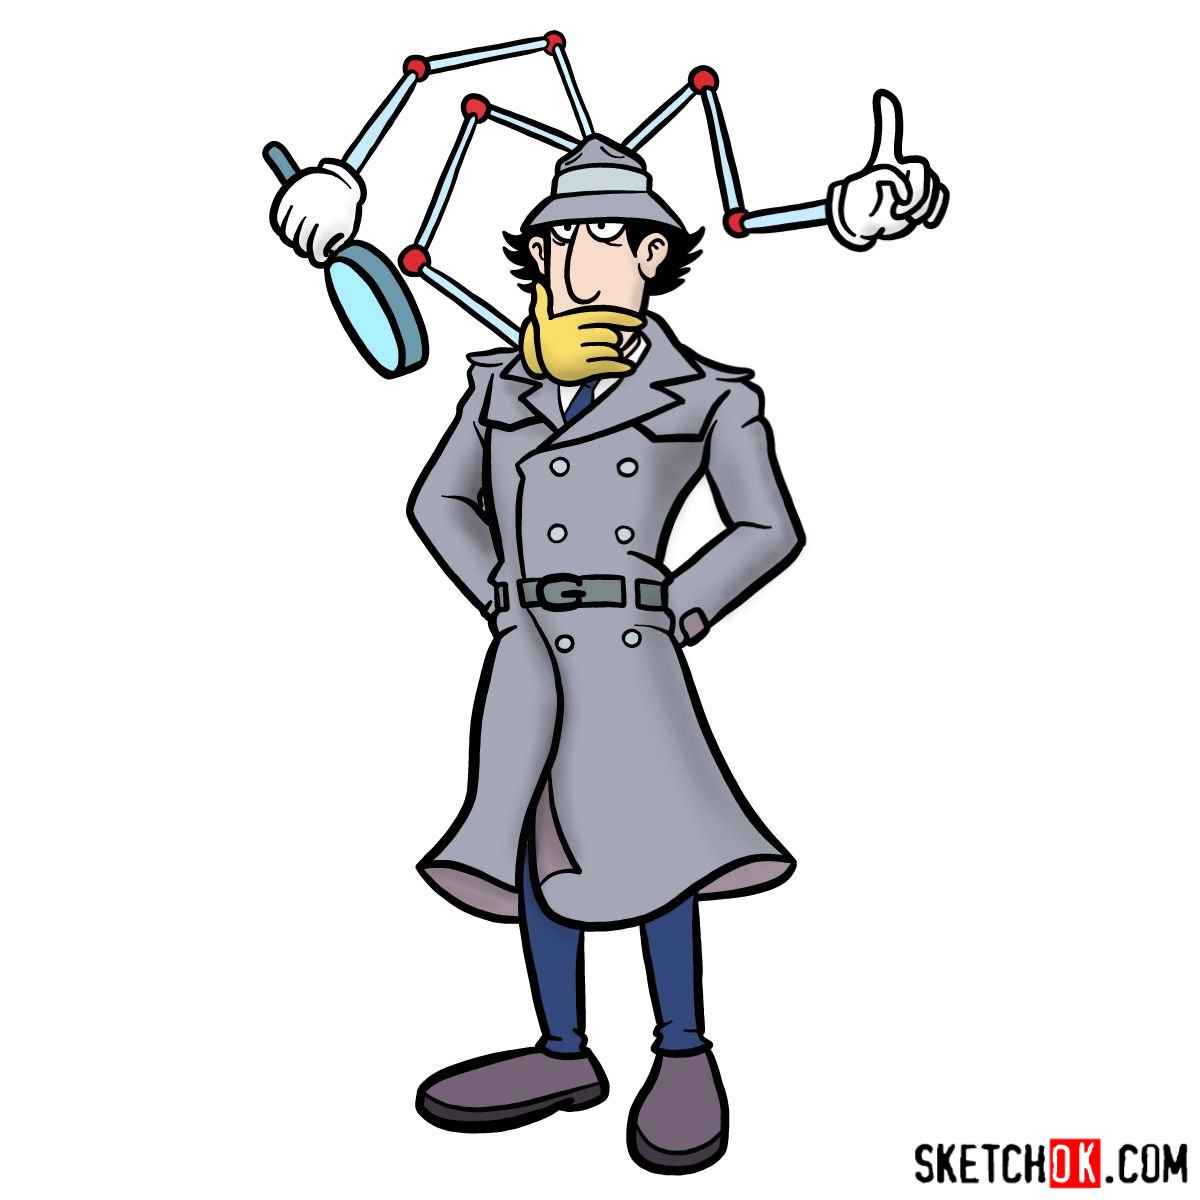 How to draw Inspector Gadget - Sketchok easy drawing guides